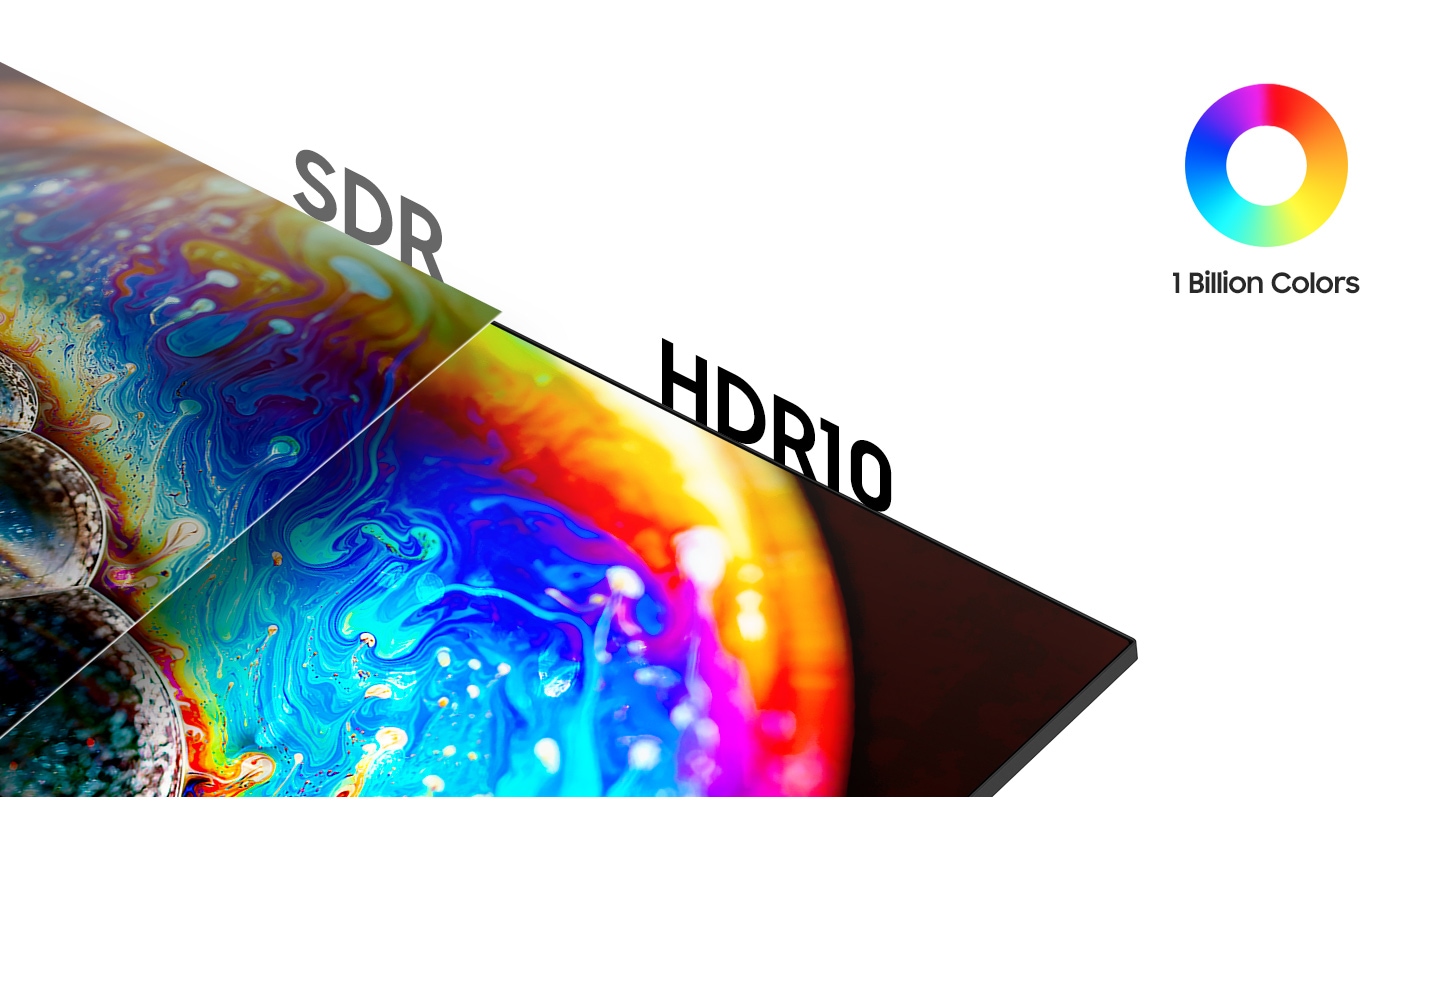 The SDR and HDR10 is being compared, and the image for HDR10 is more bright and vivid. Next the images, there are some icons representing 1 Billion Colors.